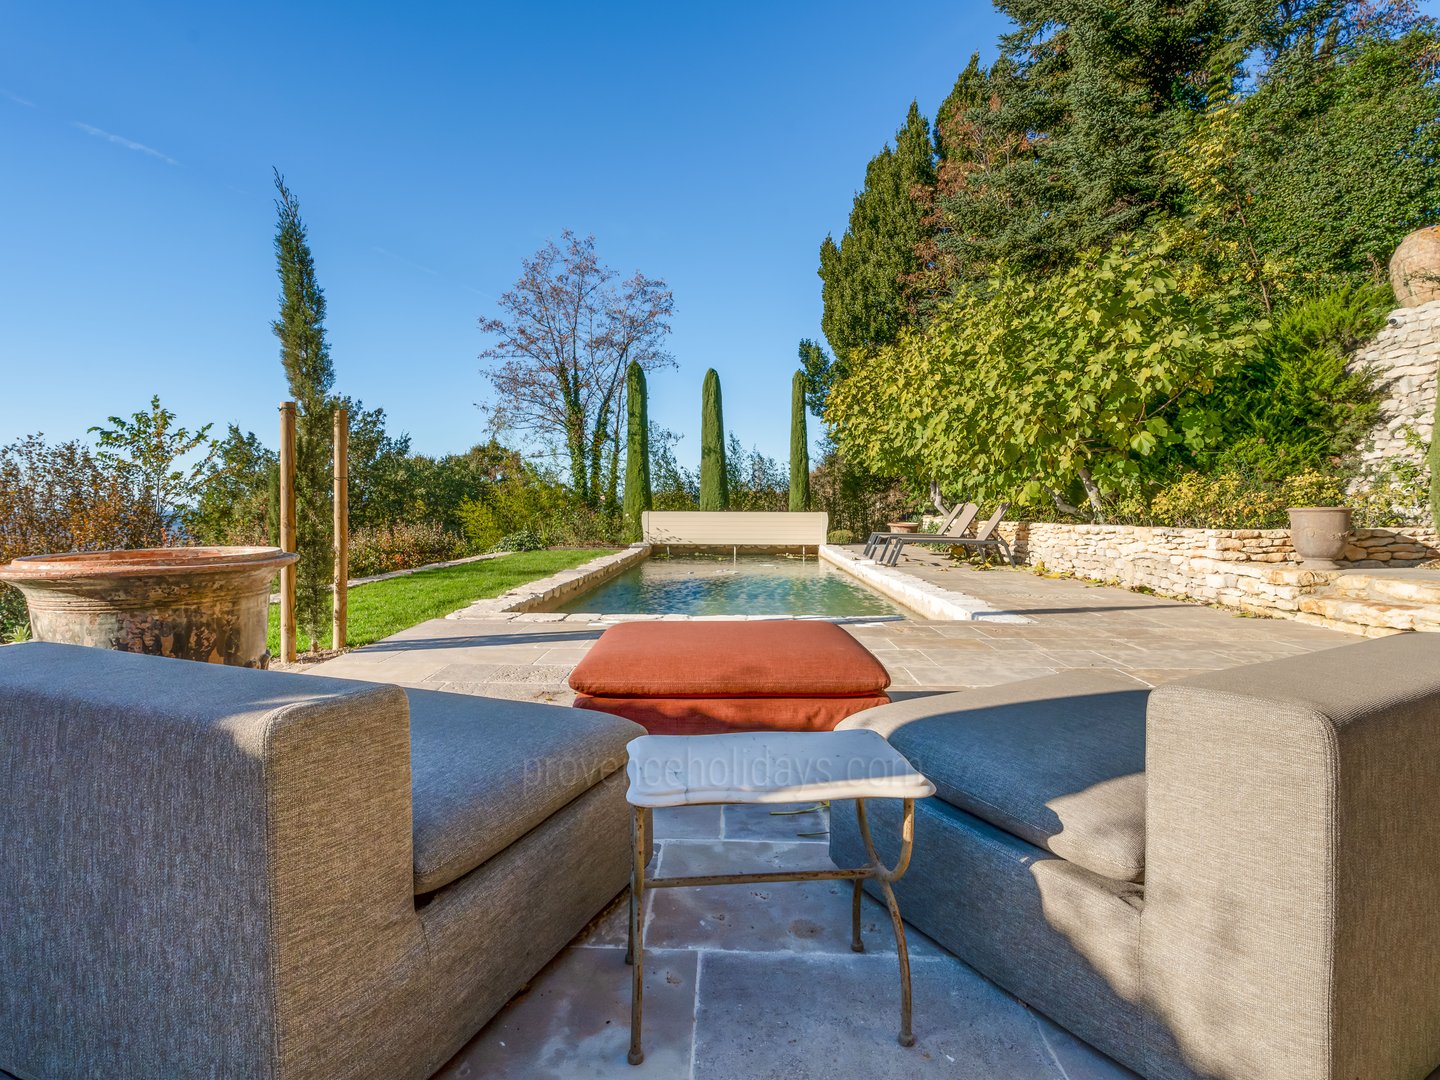 18th century Bastide with views of Luberon for sale - Bonnieux - 4